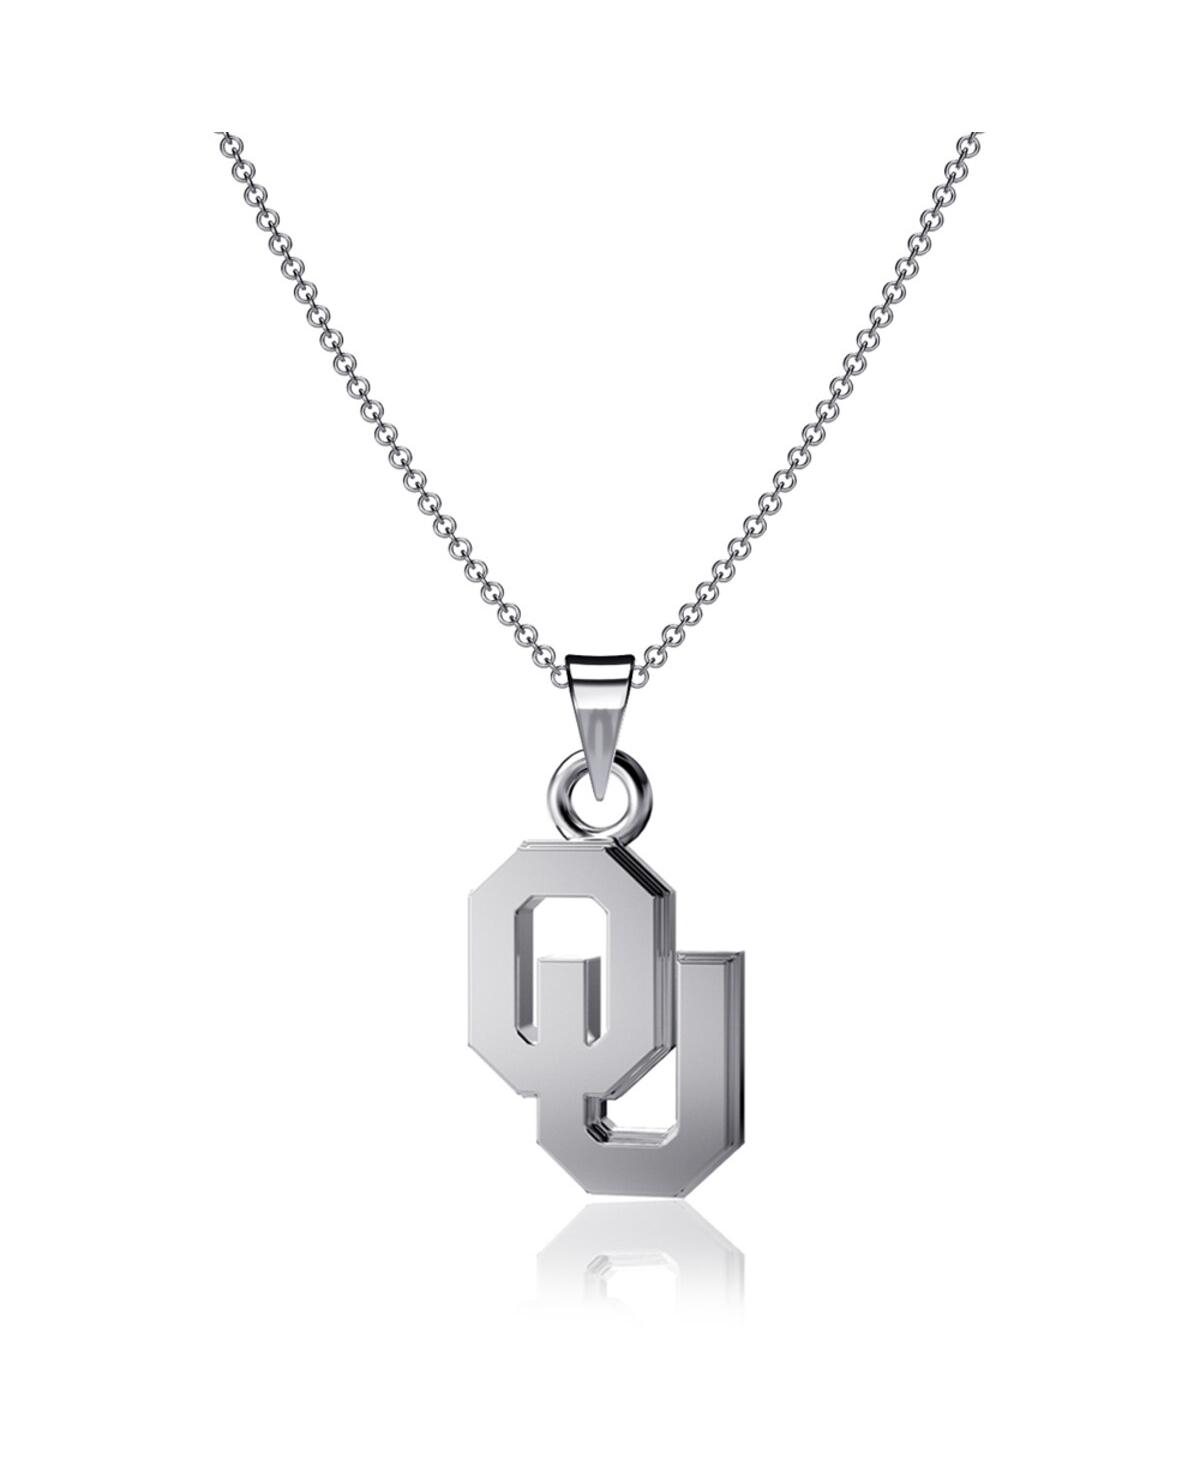 Women's Dayna Designs Oklahoma Sooners Silver Small Pendant Necklace - Silver